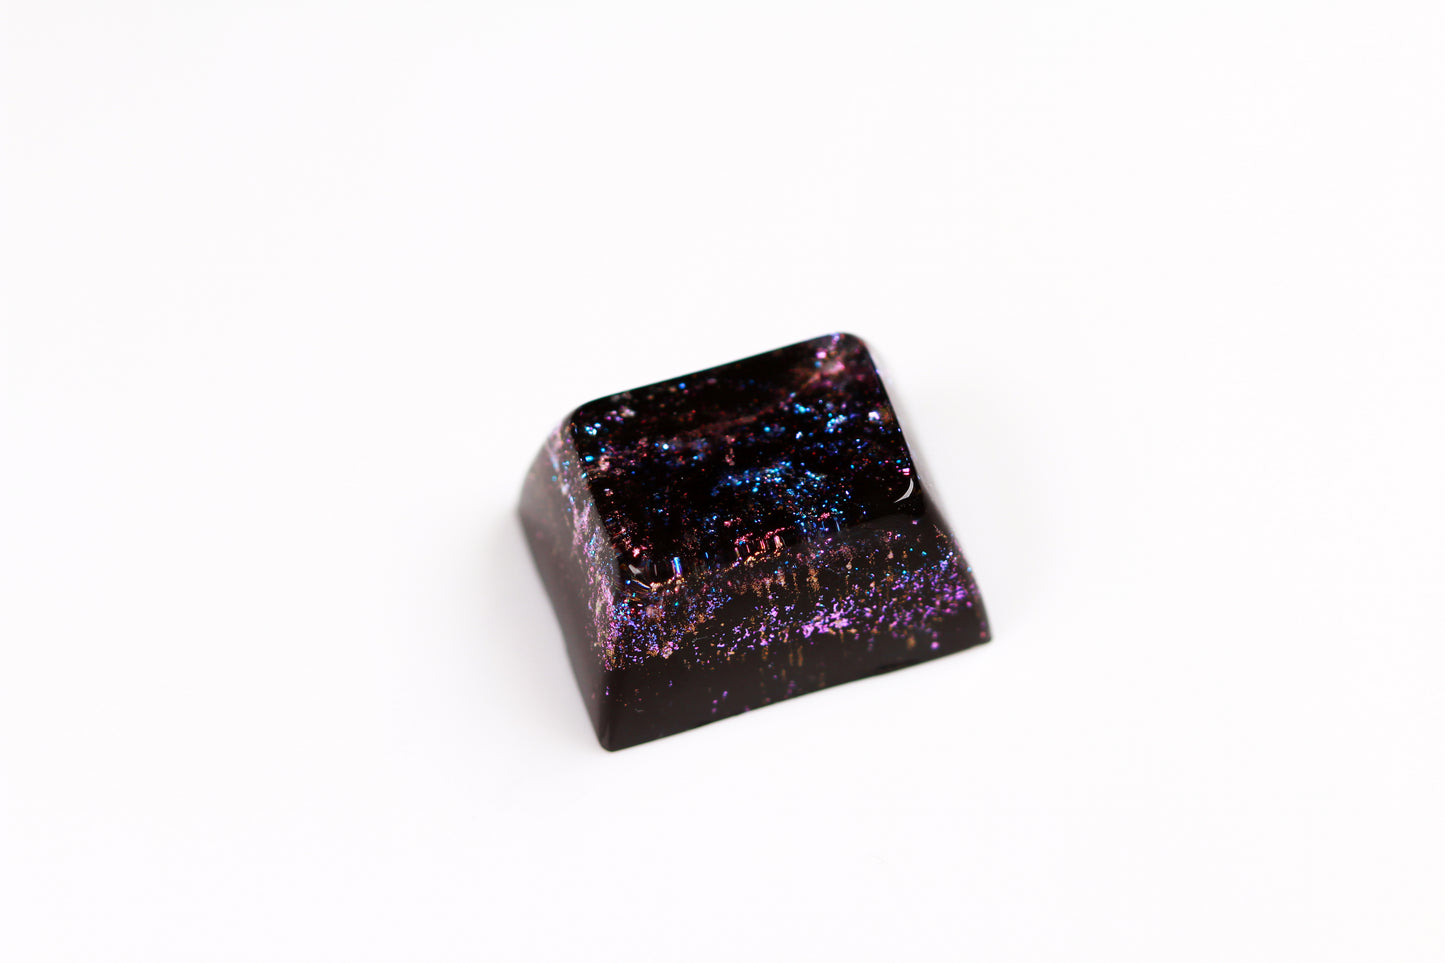 Gimpy SA Row 3, 1.25u - Deep Field Particle Stream 4 - PrimeCaps Keycap - Blank and Sculpted Artisan Keycaps for cherry MX mechanical keyboards 